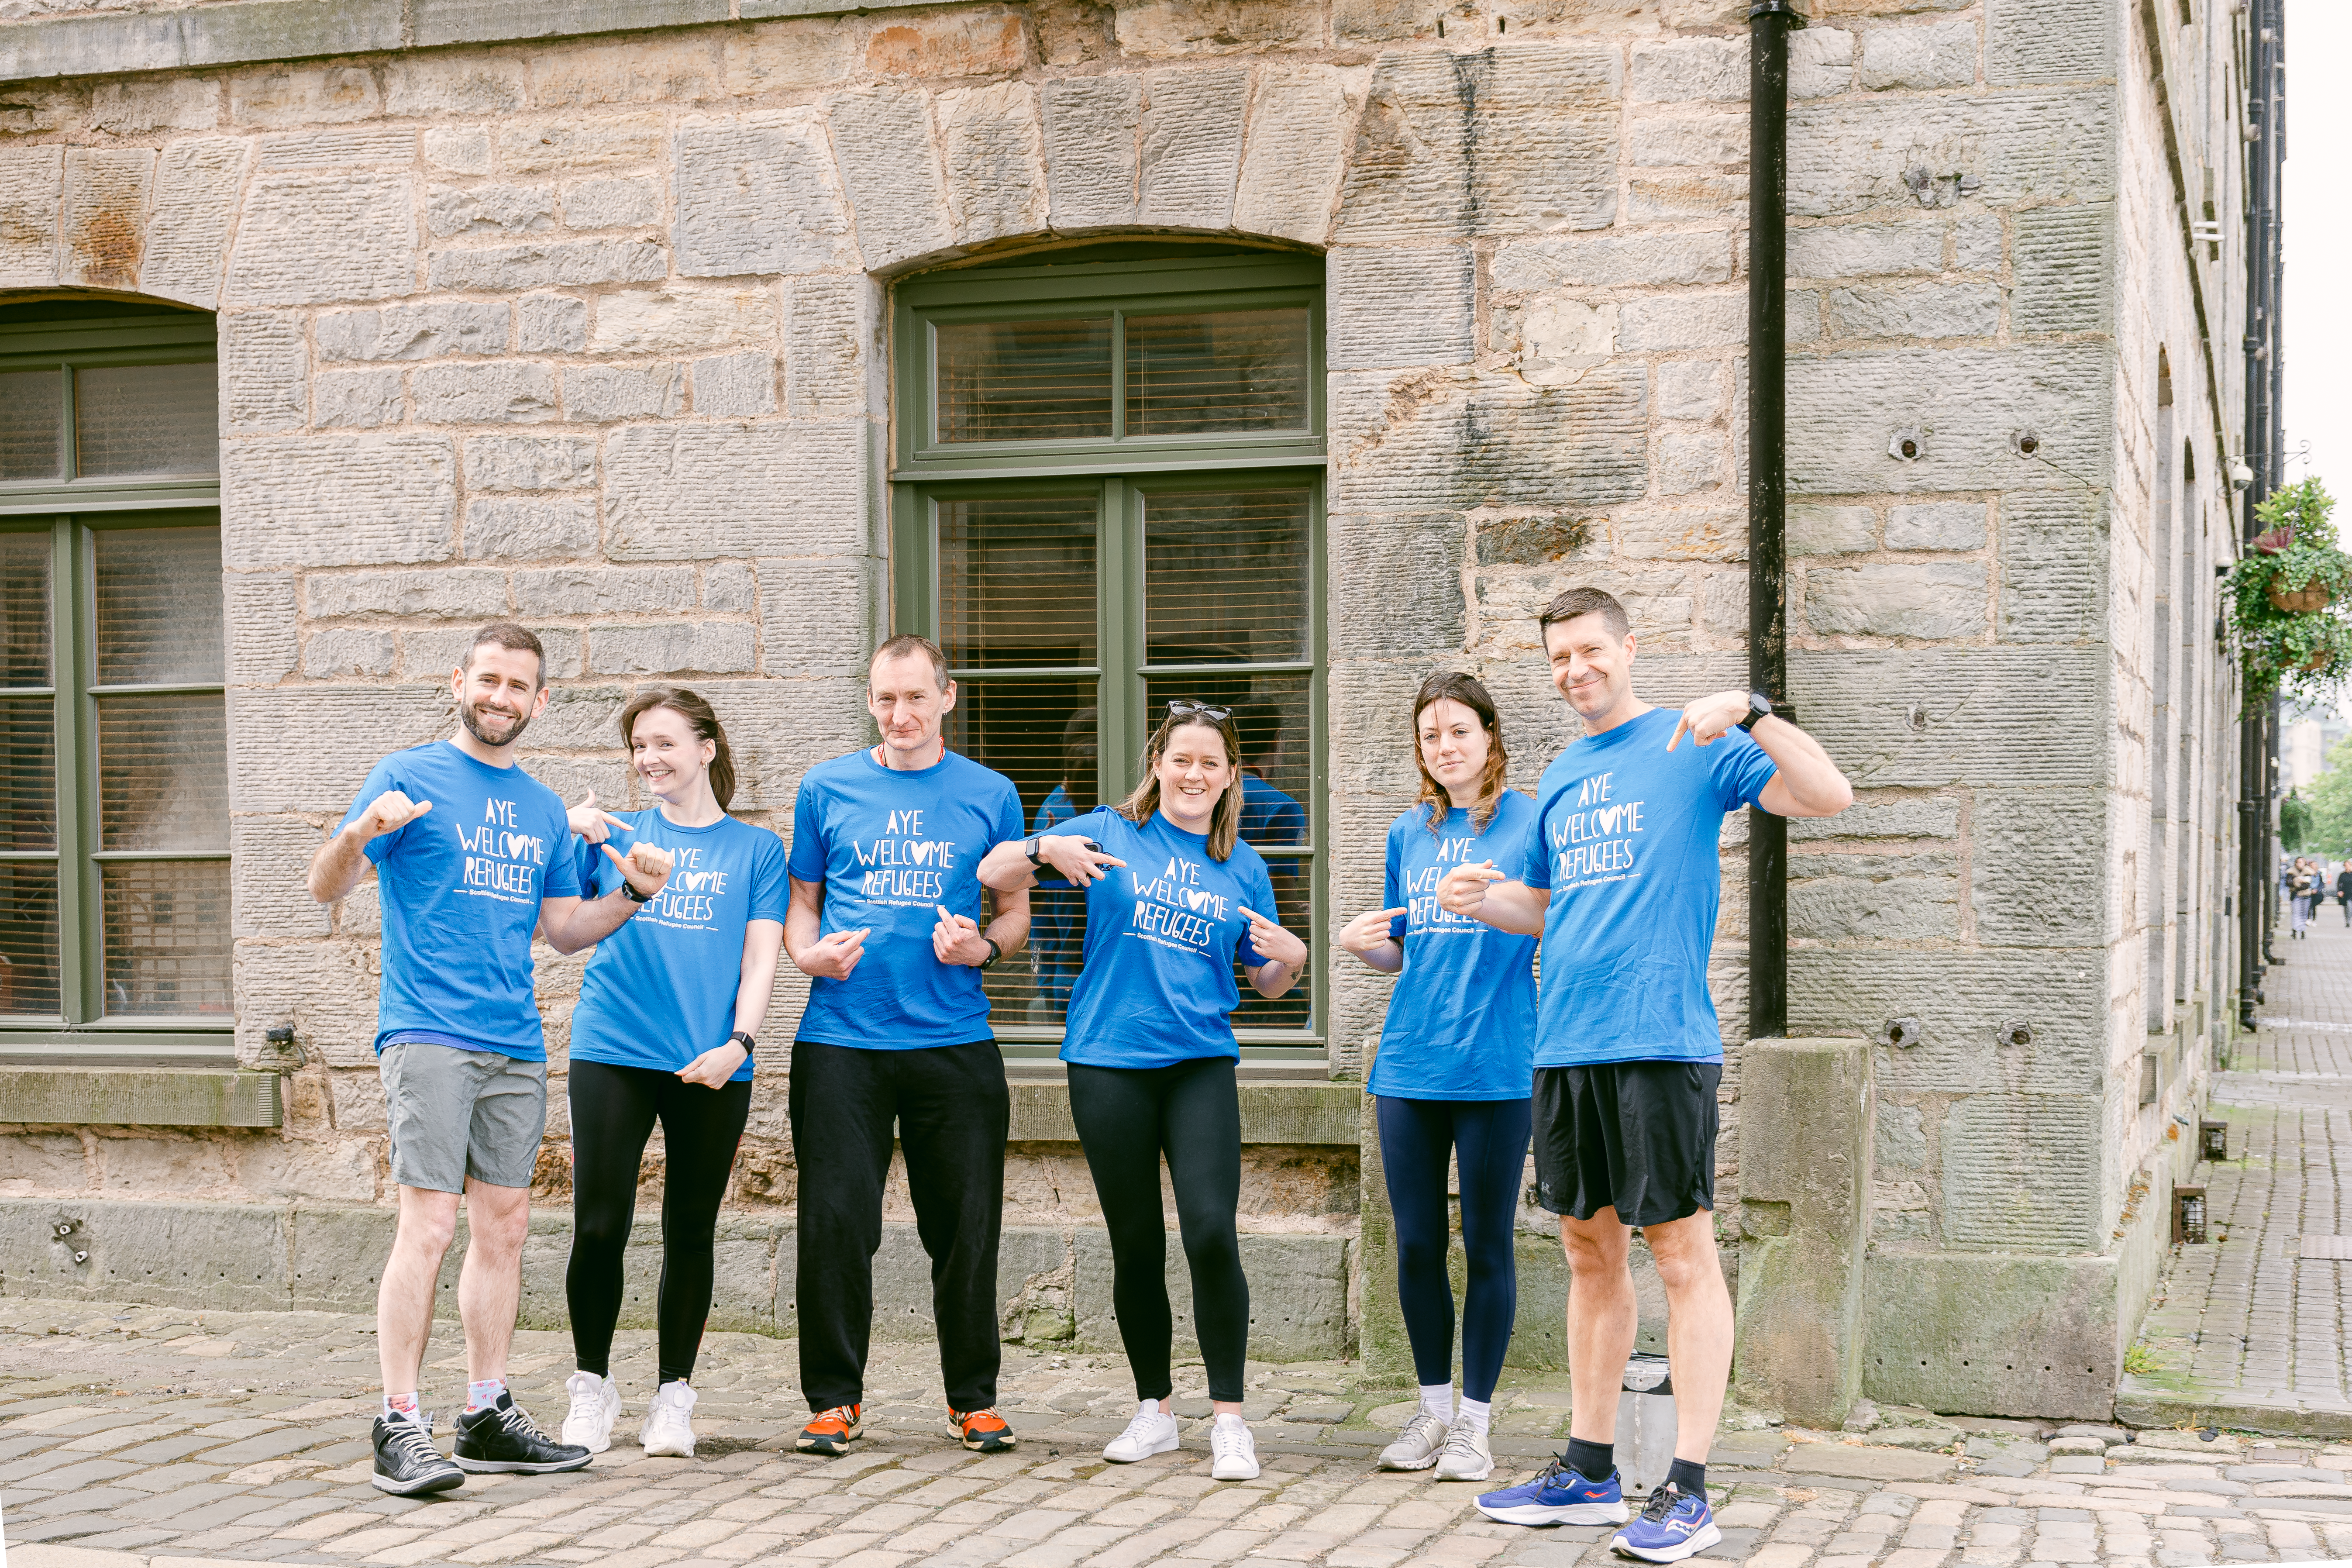 Amiqus team of runners participating in the Edinburgh Marathon Festival 2024 pose outside the Amiqus office in Leith, Edinburgh